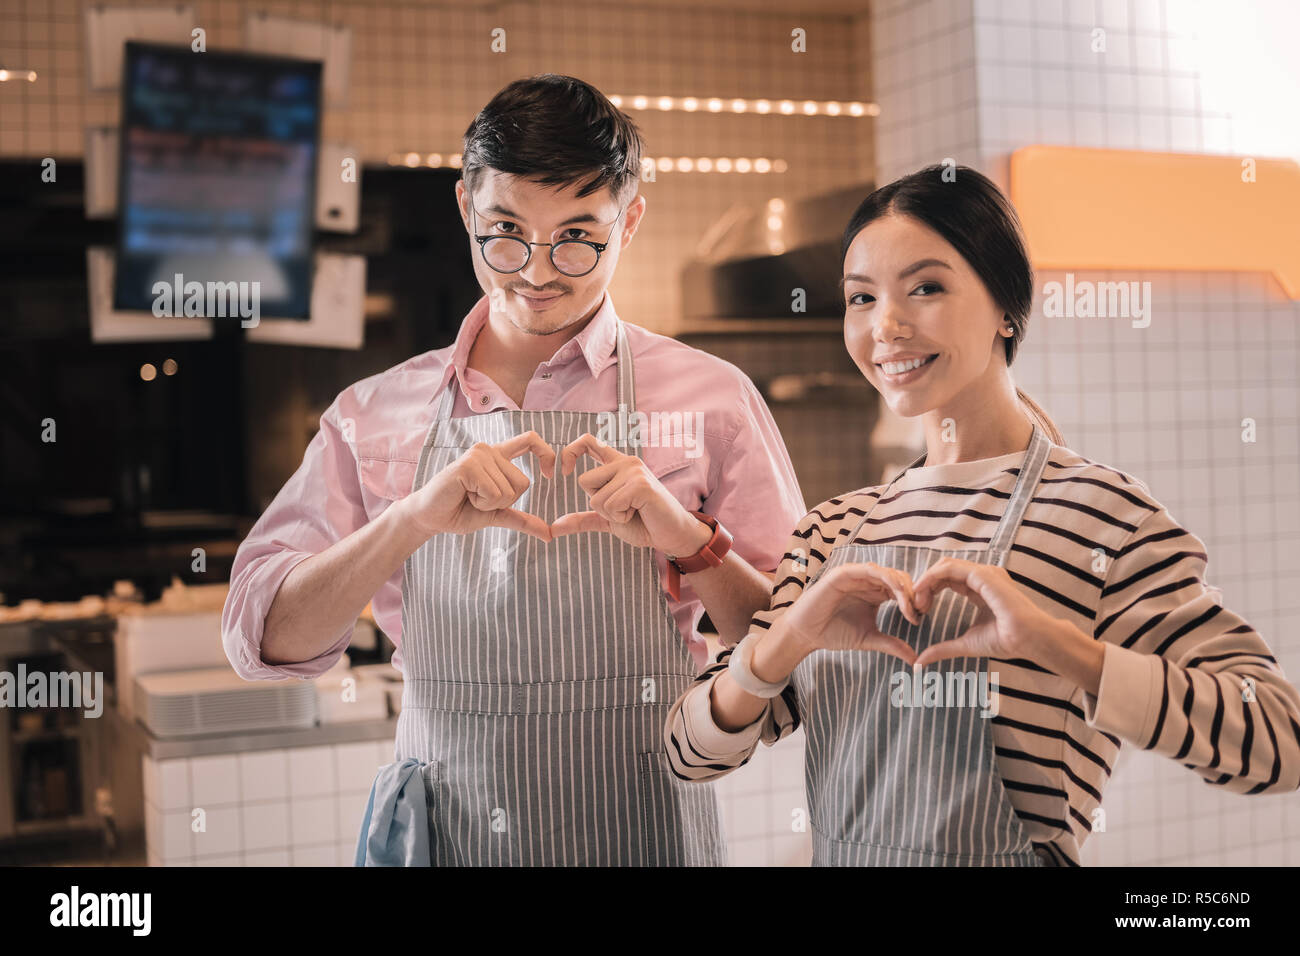 Young couple of successful entrepreneurs opening their own coffee bar Stock Photo